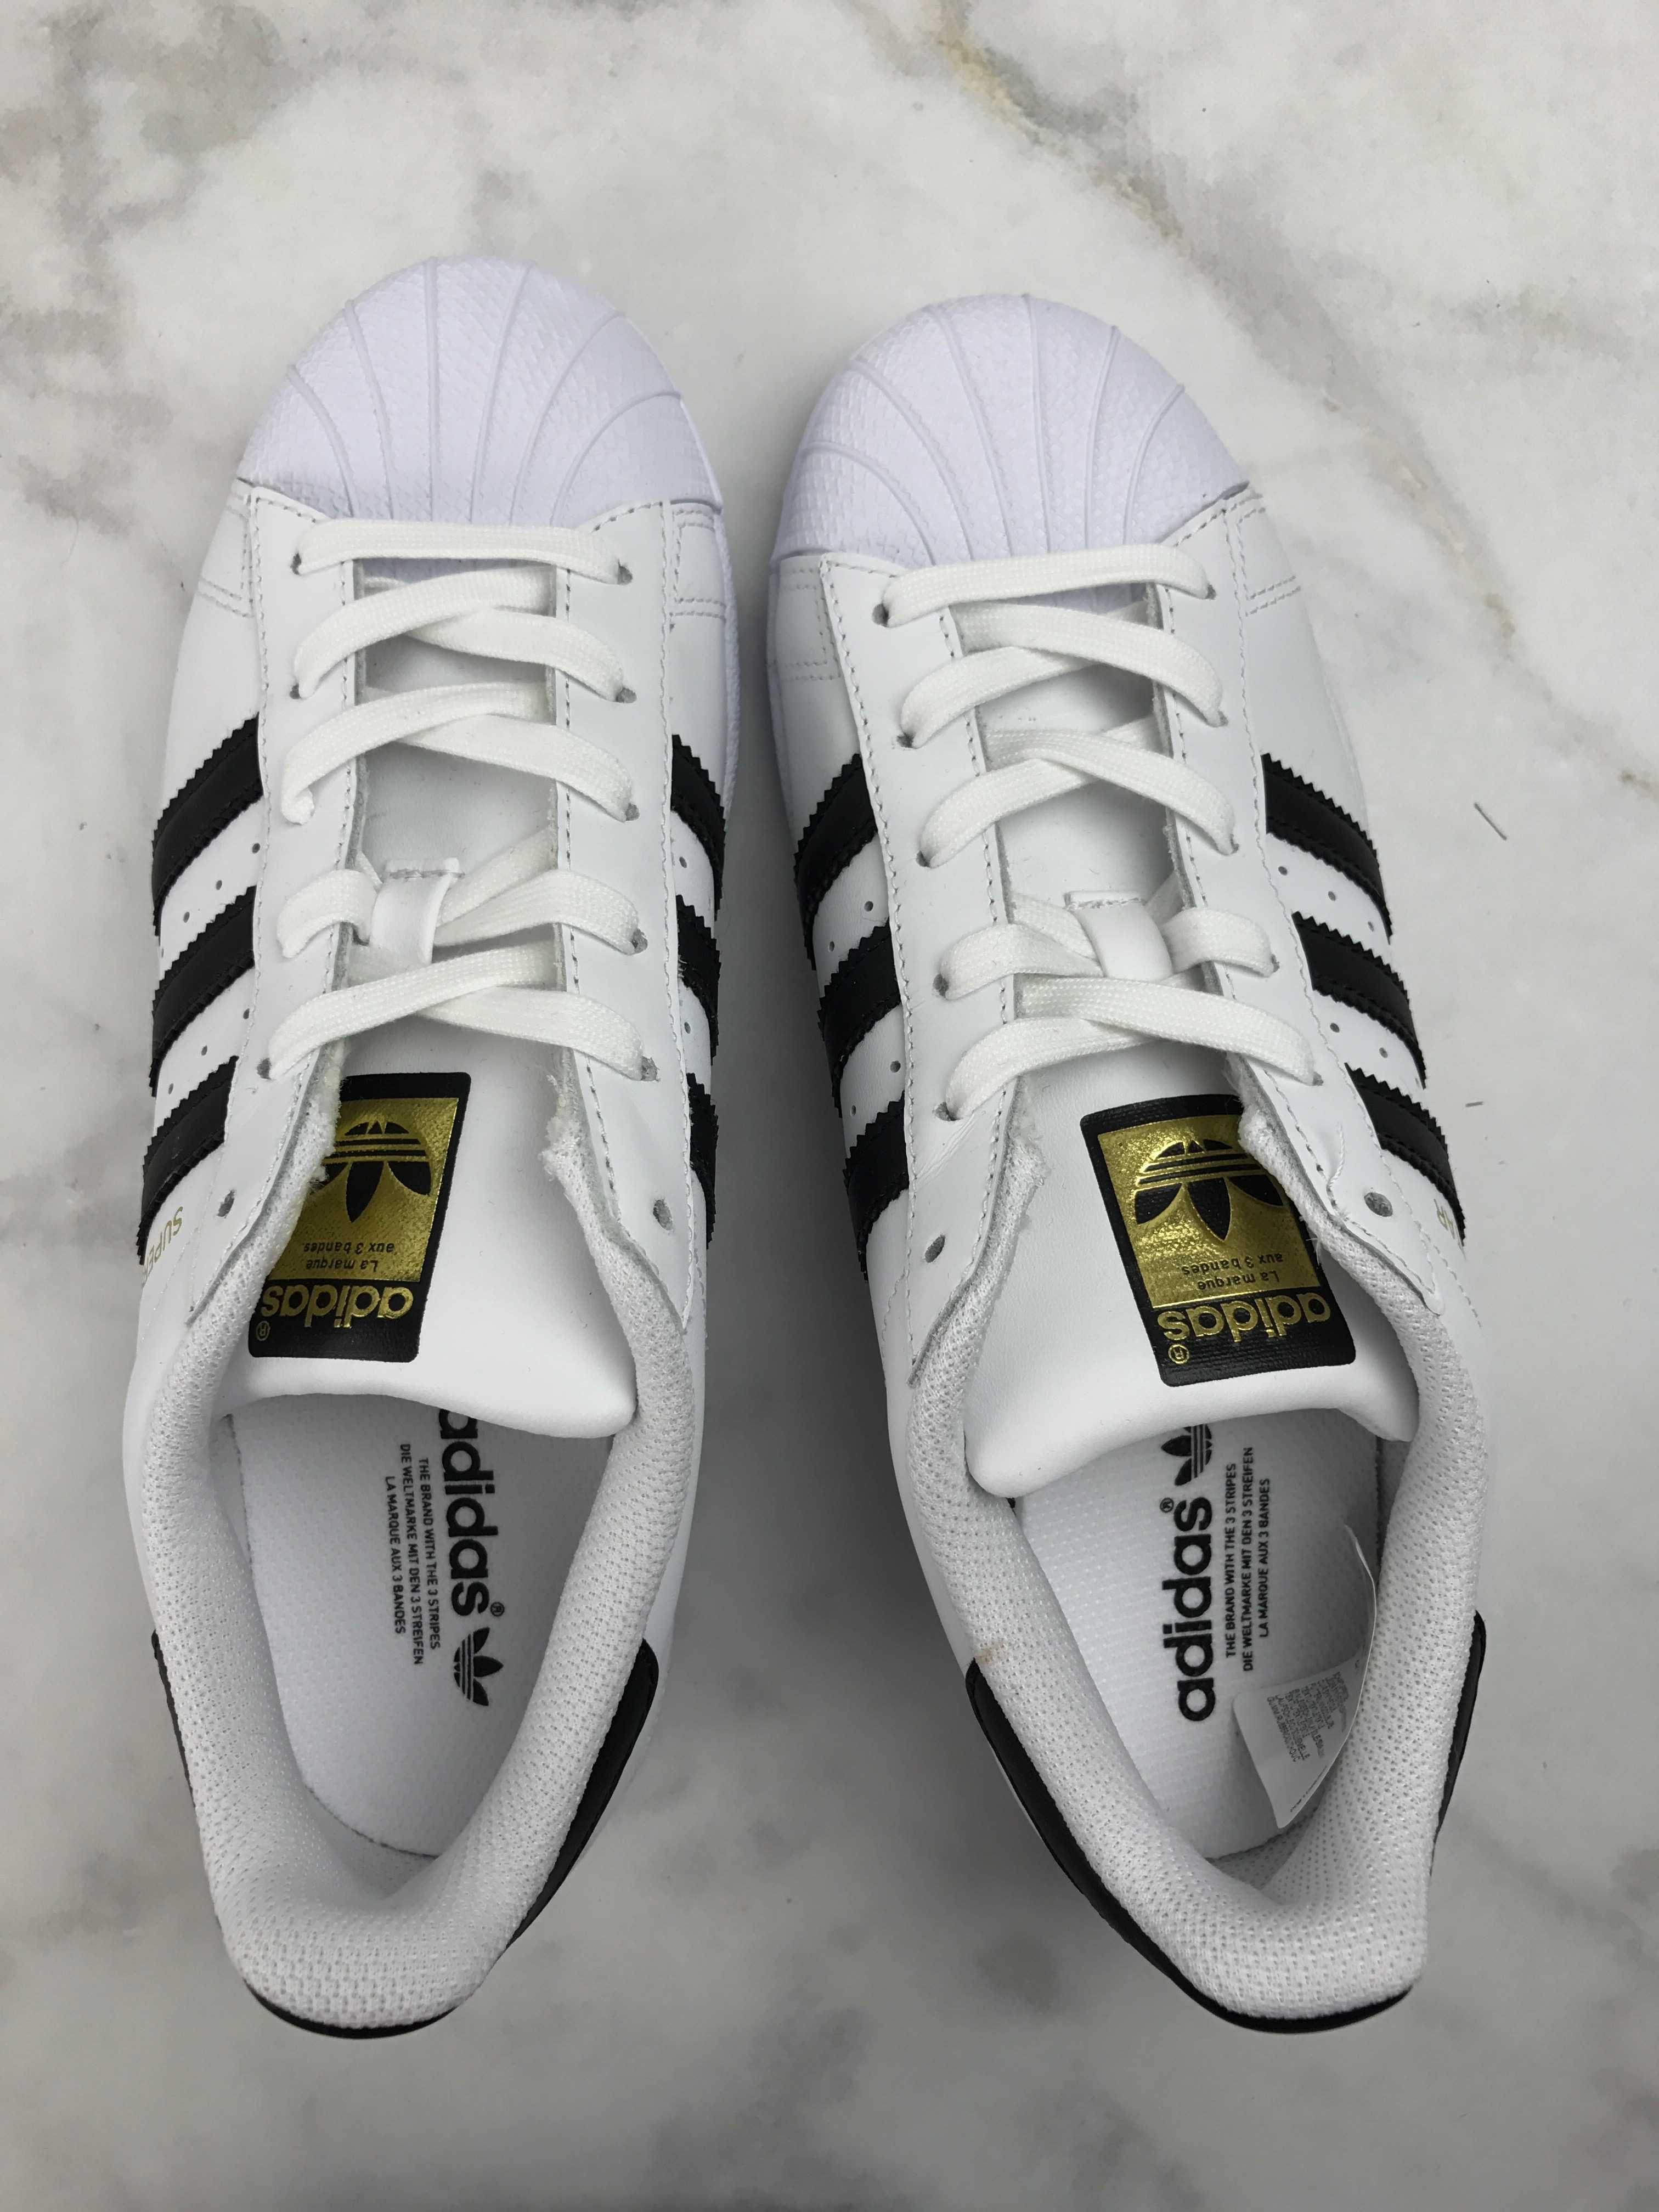 Avenue A by Adidas Winter 2016 Subscription Box Review - hello subscription